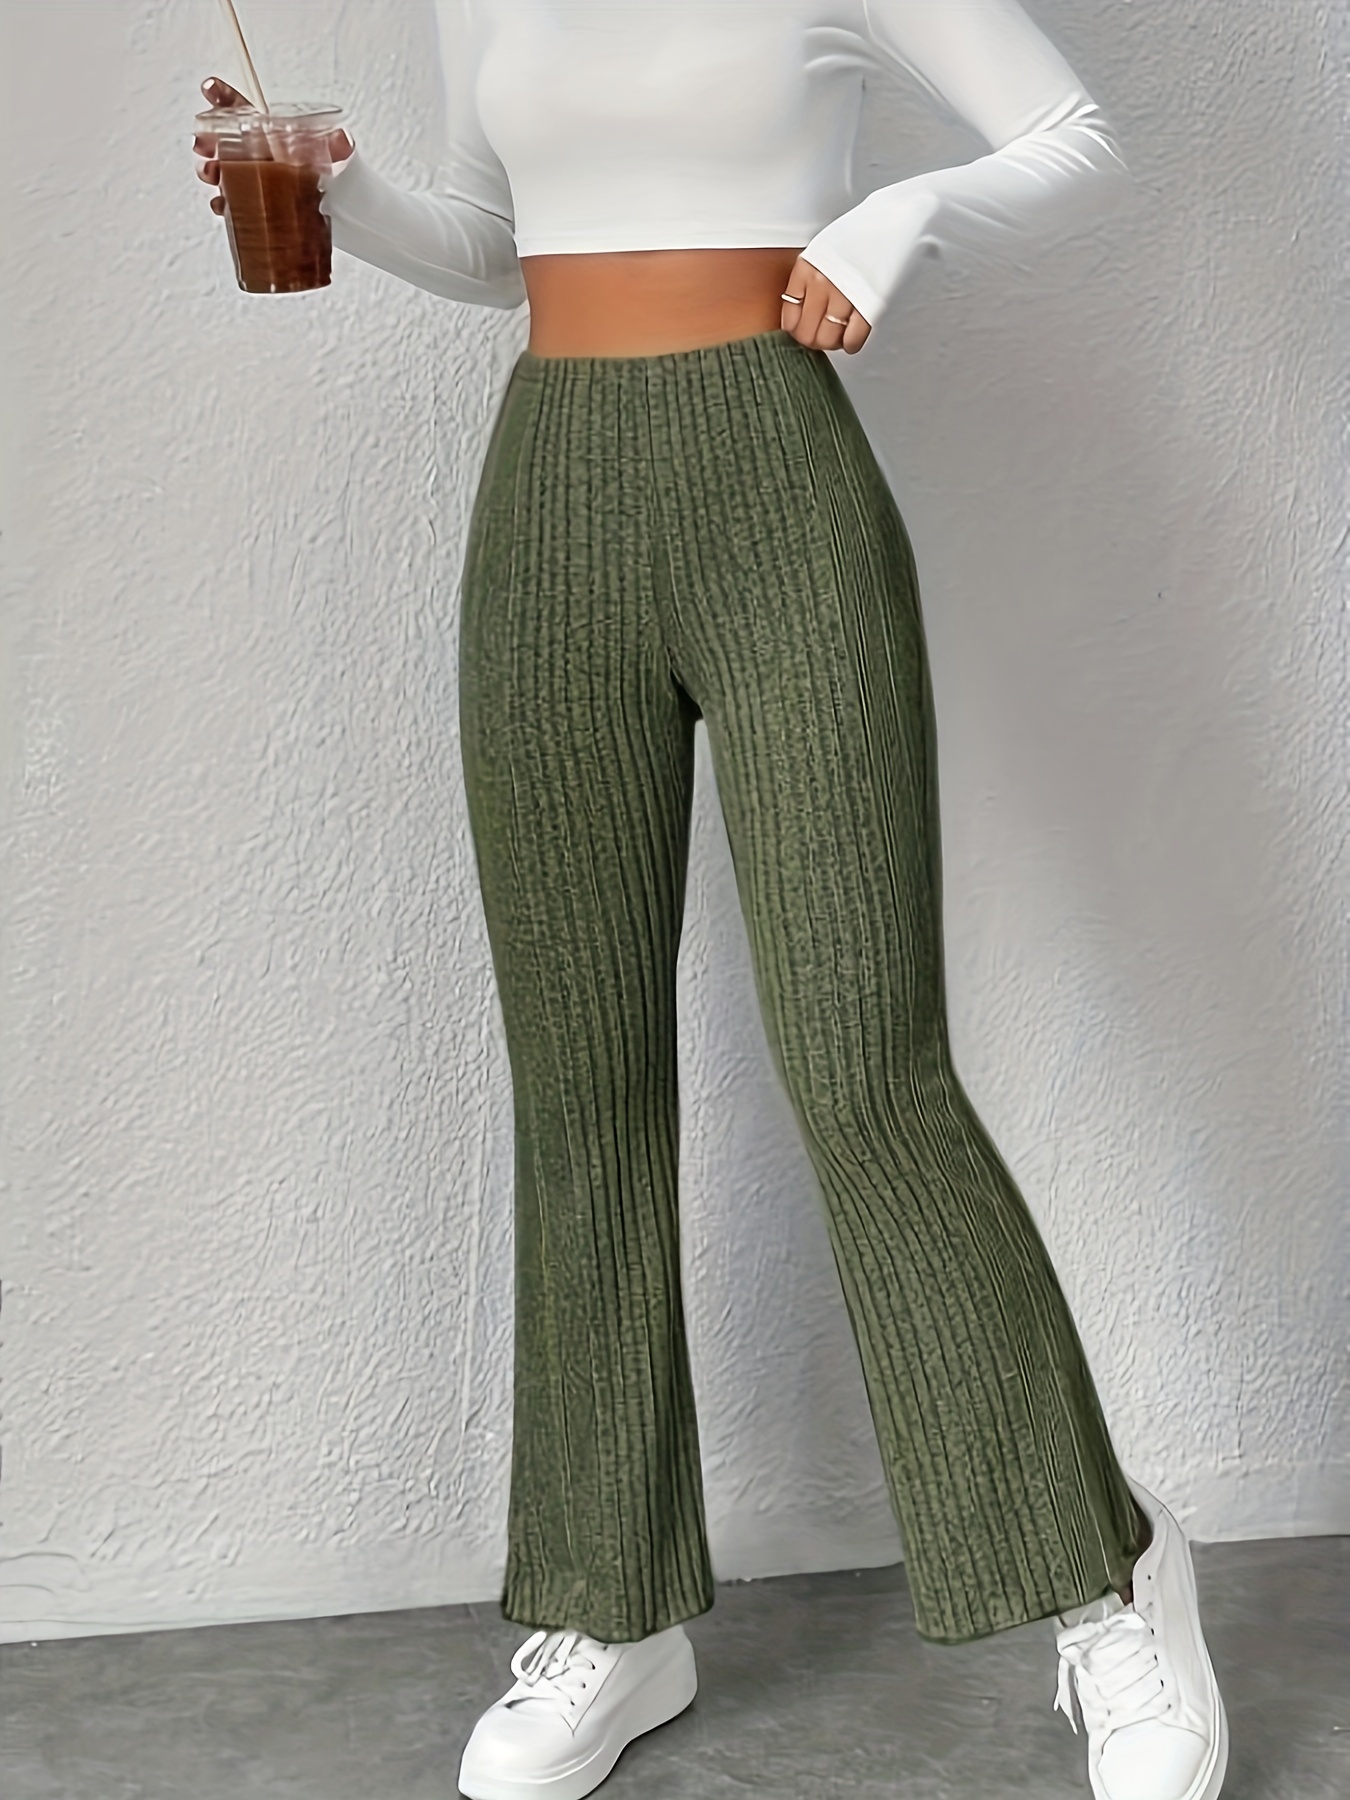 Buy Milumia Women Casual Ribbed Knit High Waist Trousers Flare Leg